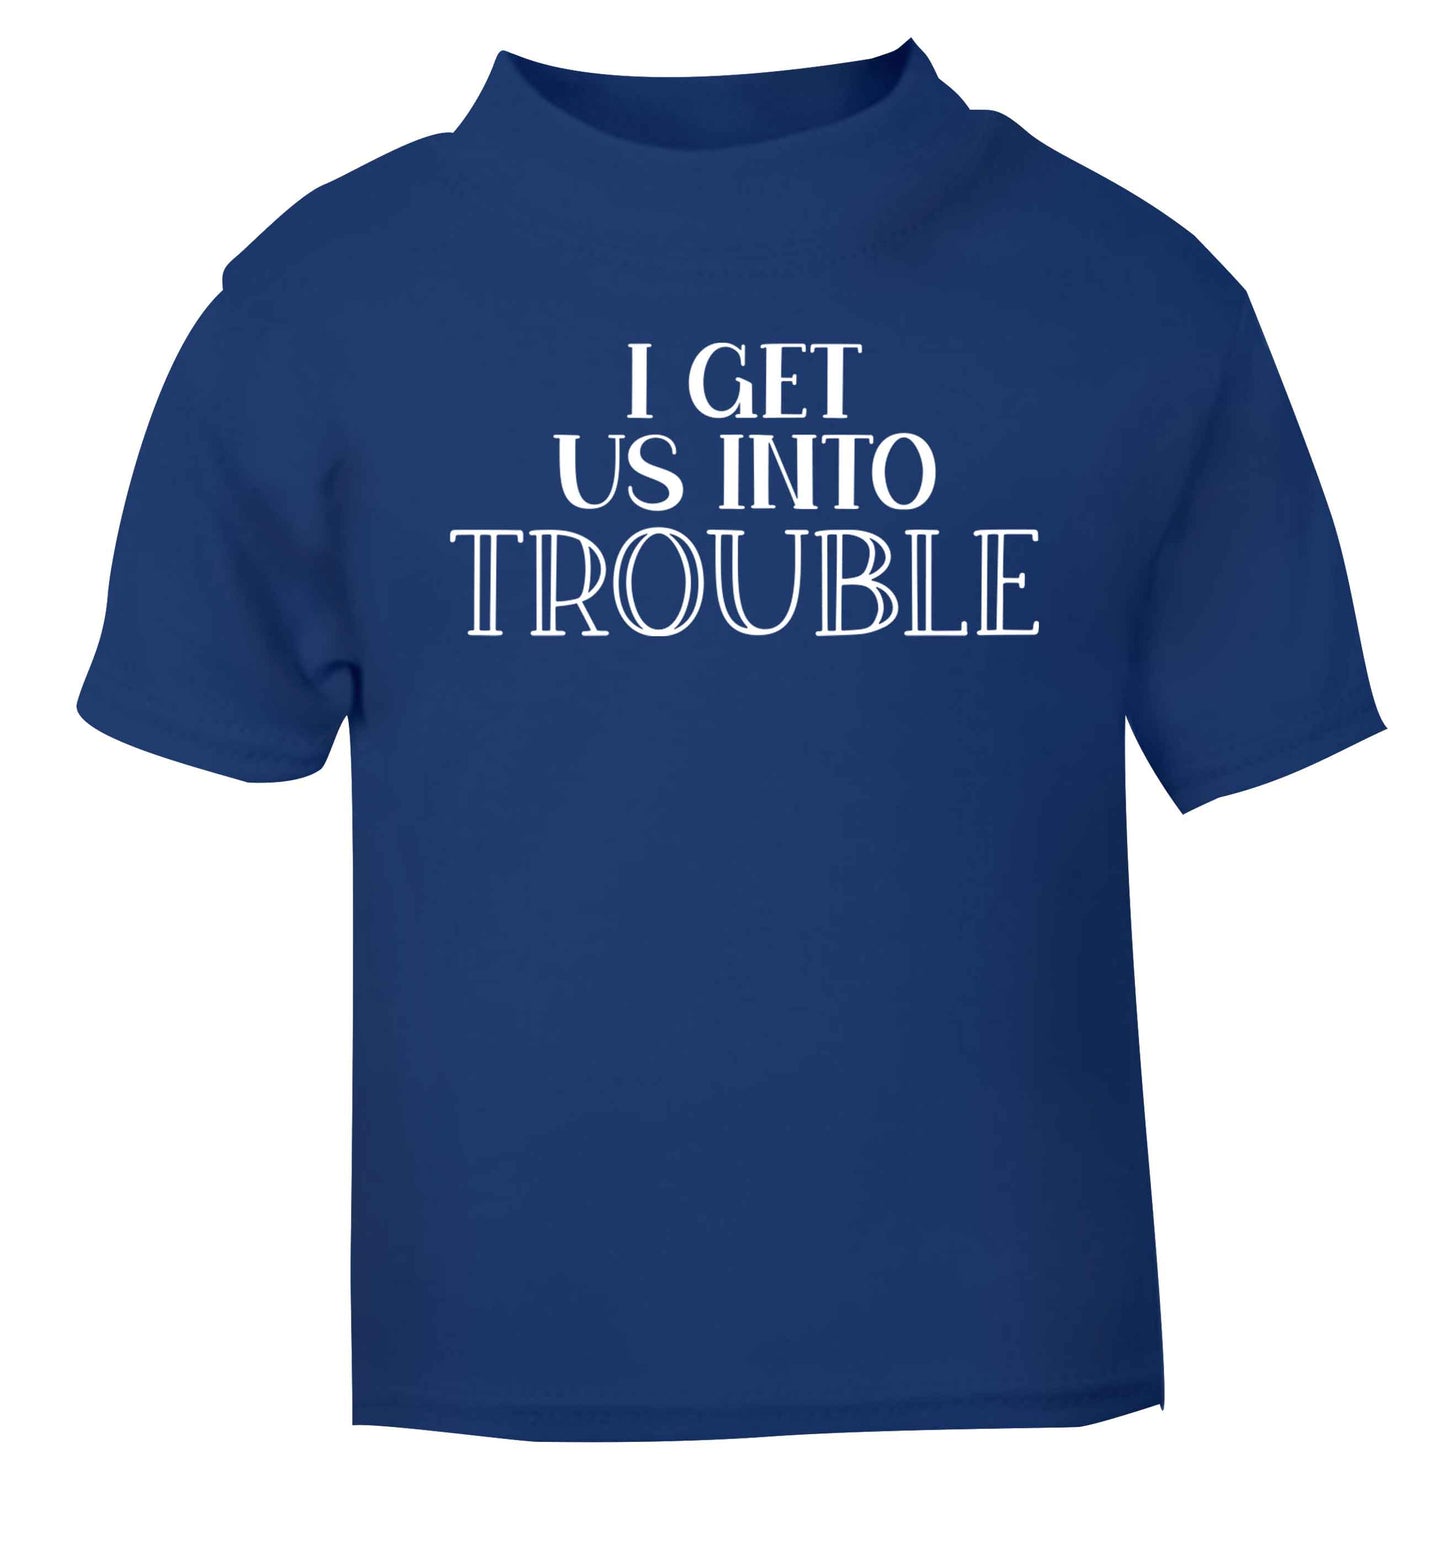 I get us into trouble blue baby toddler Tshirt 2 Years